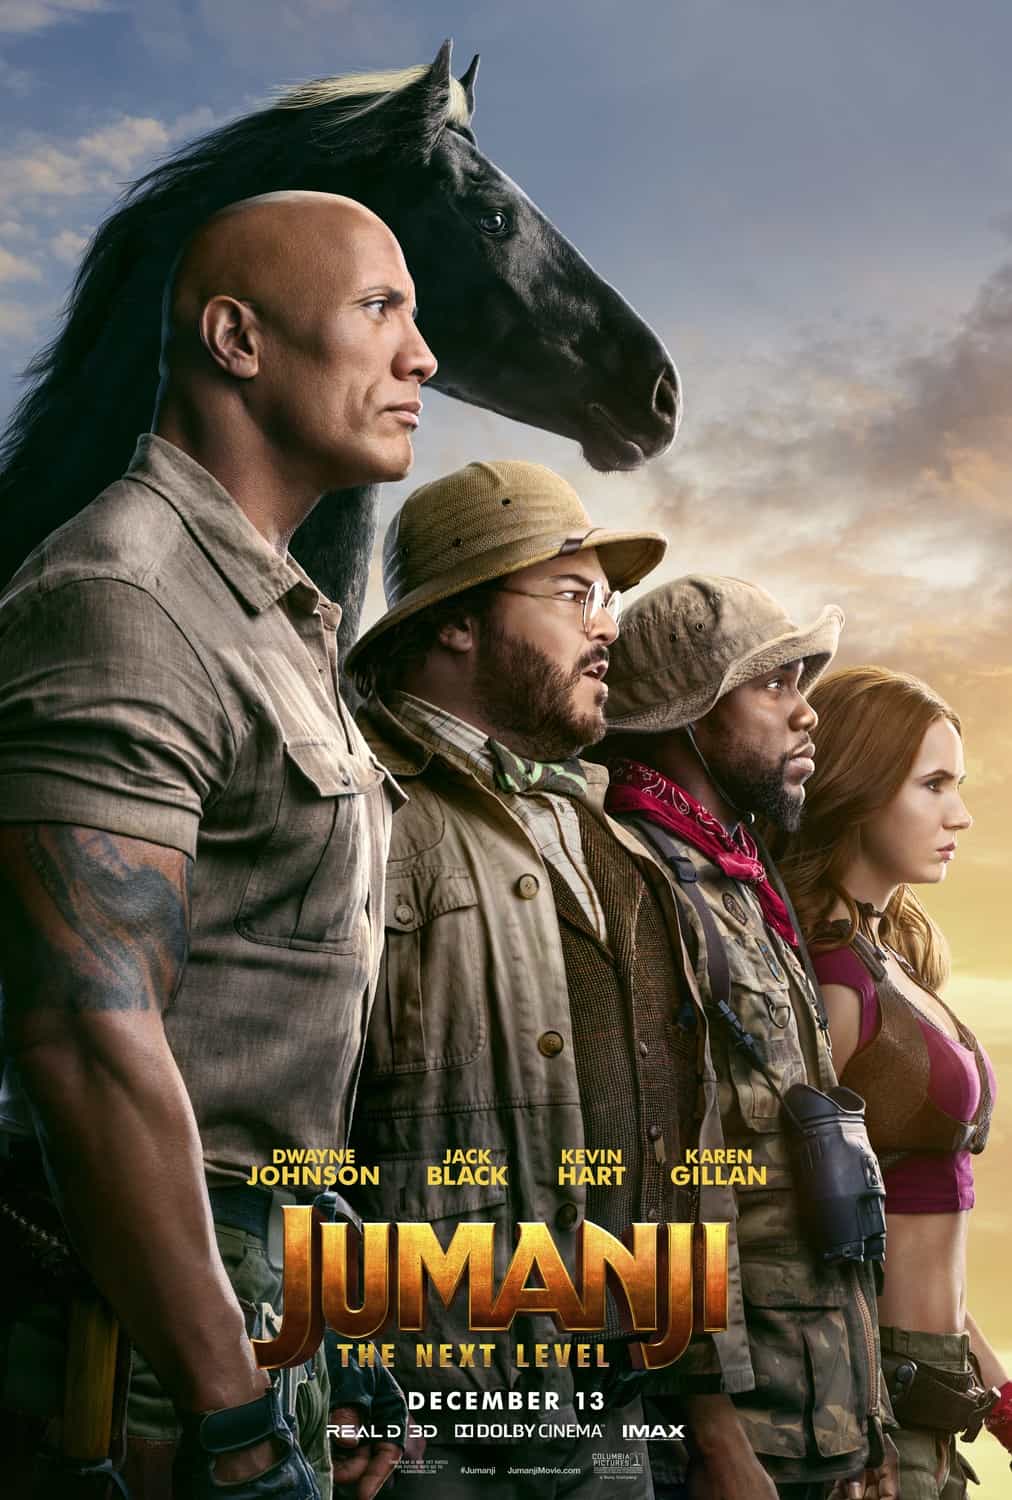 Home Video And Streaming Chart in the UK 15th - 21st April 2020:  Jumanji moves up the chart to the top